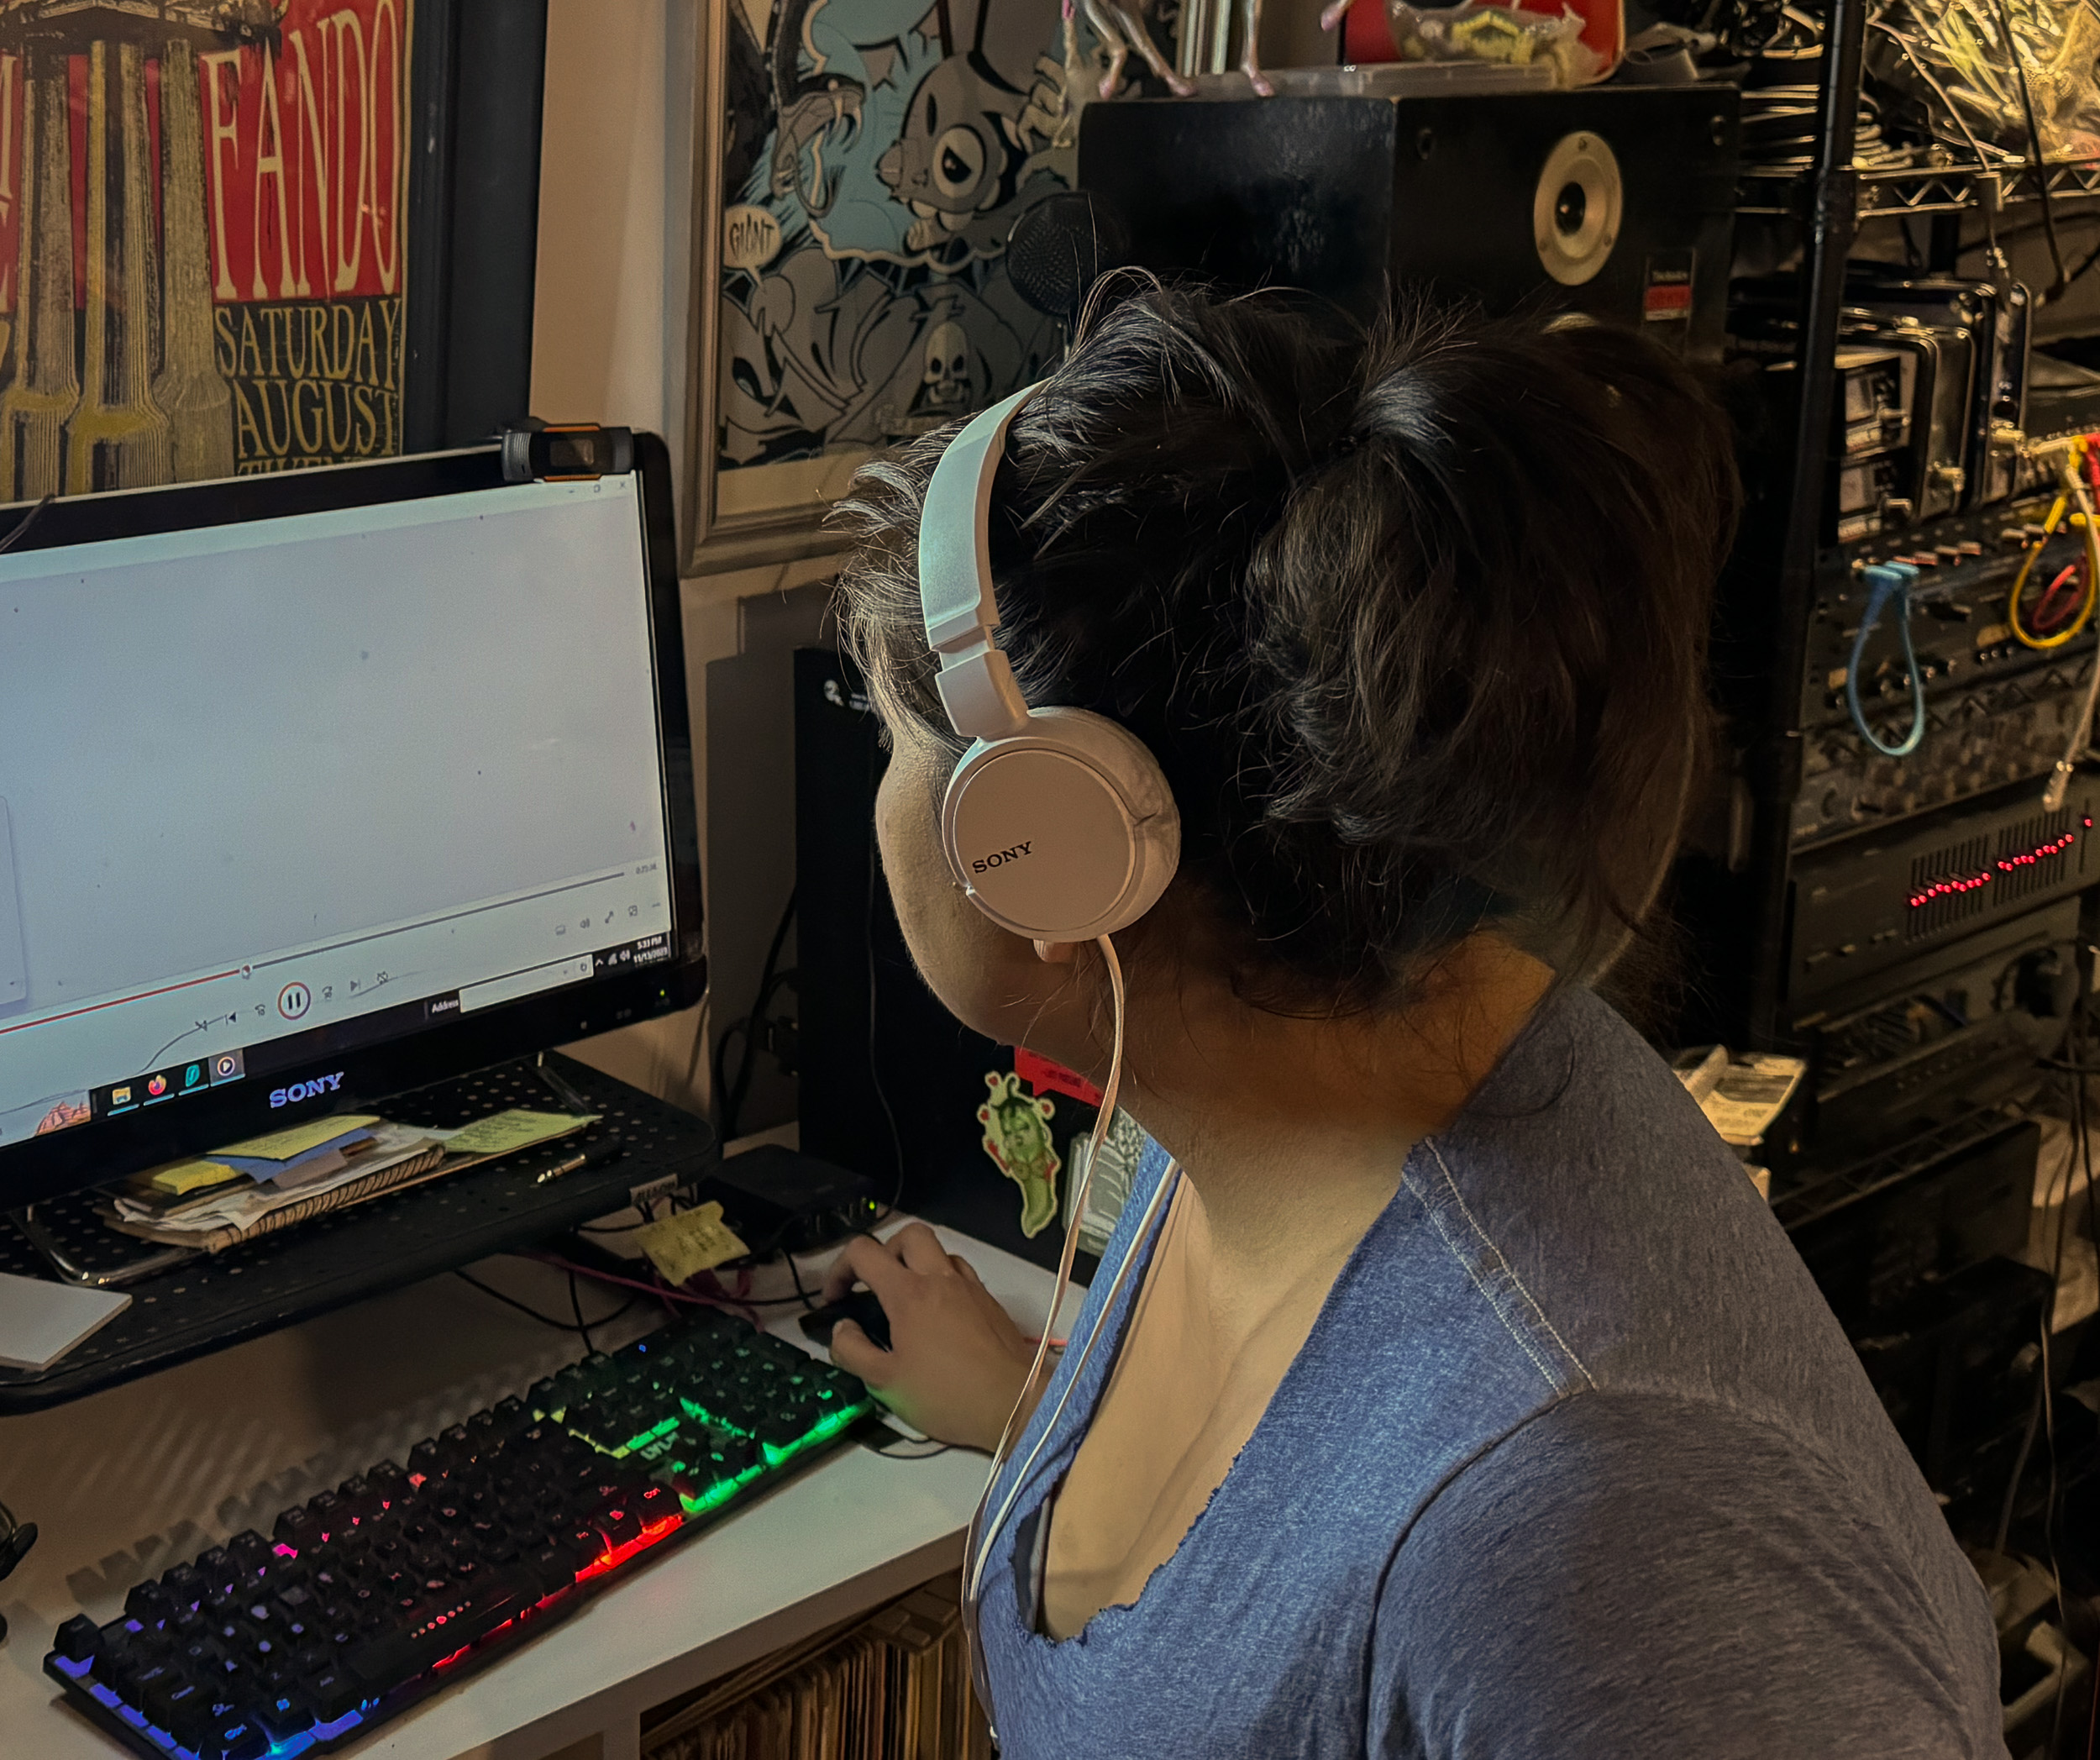 A woman wearing white headphones works on a computer